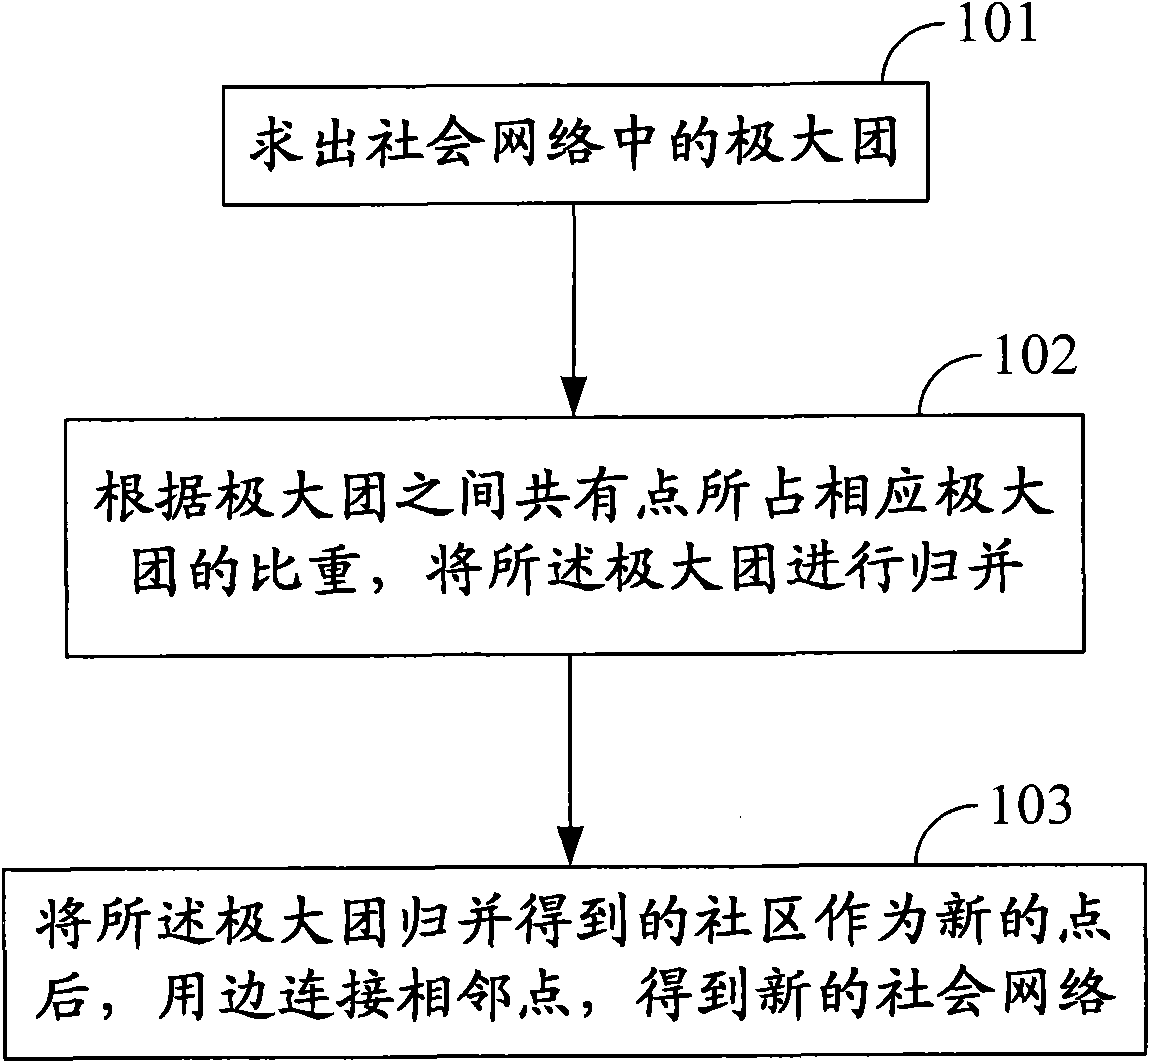 Social network partitioning method and system based on cloud computing